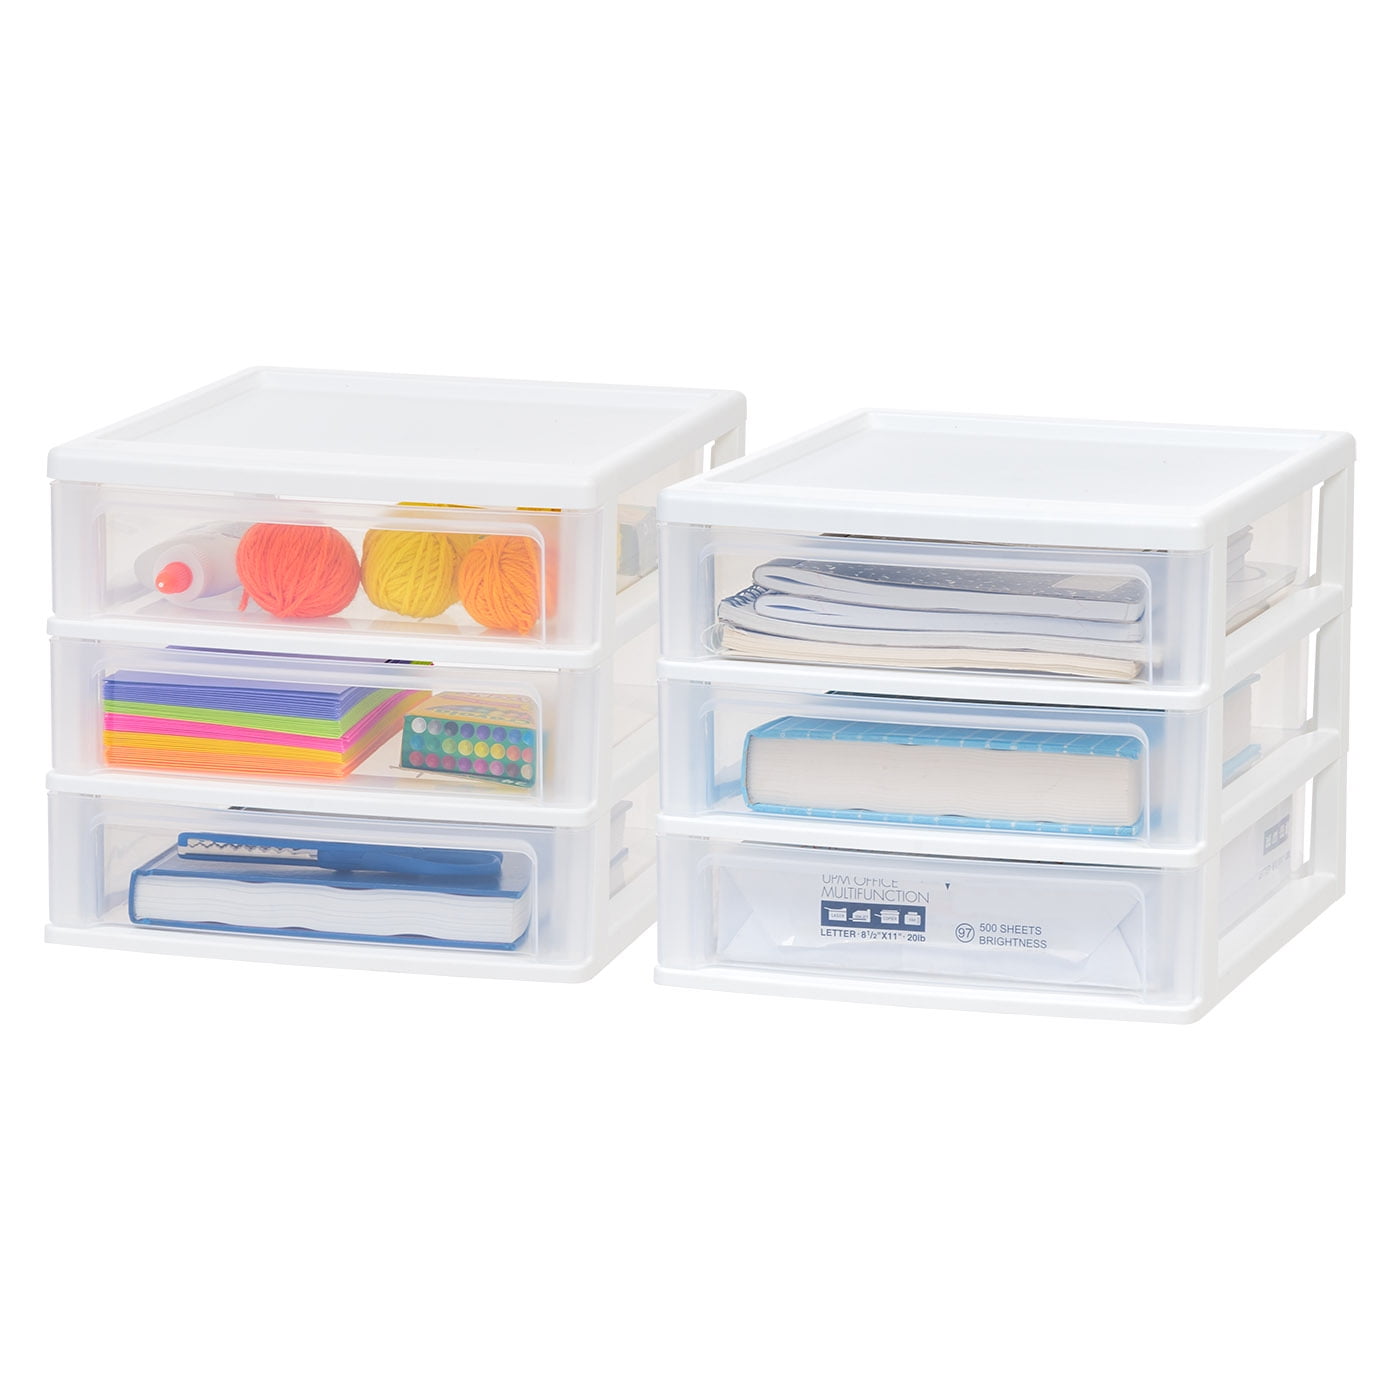  Ciieeo Small Desk Organizer with Drawers 3-Drawer